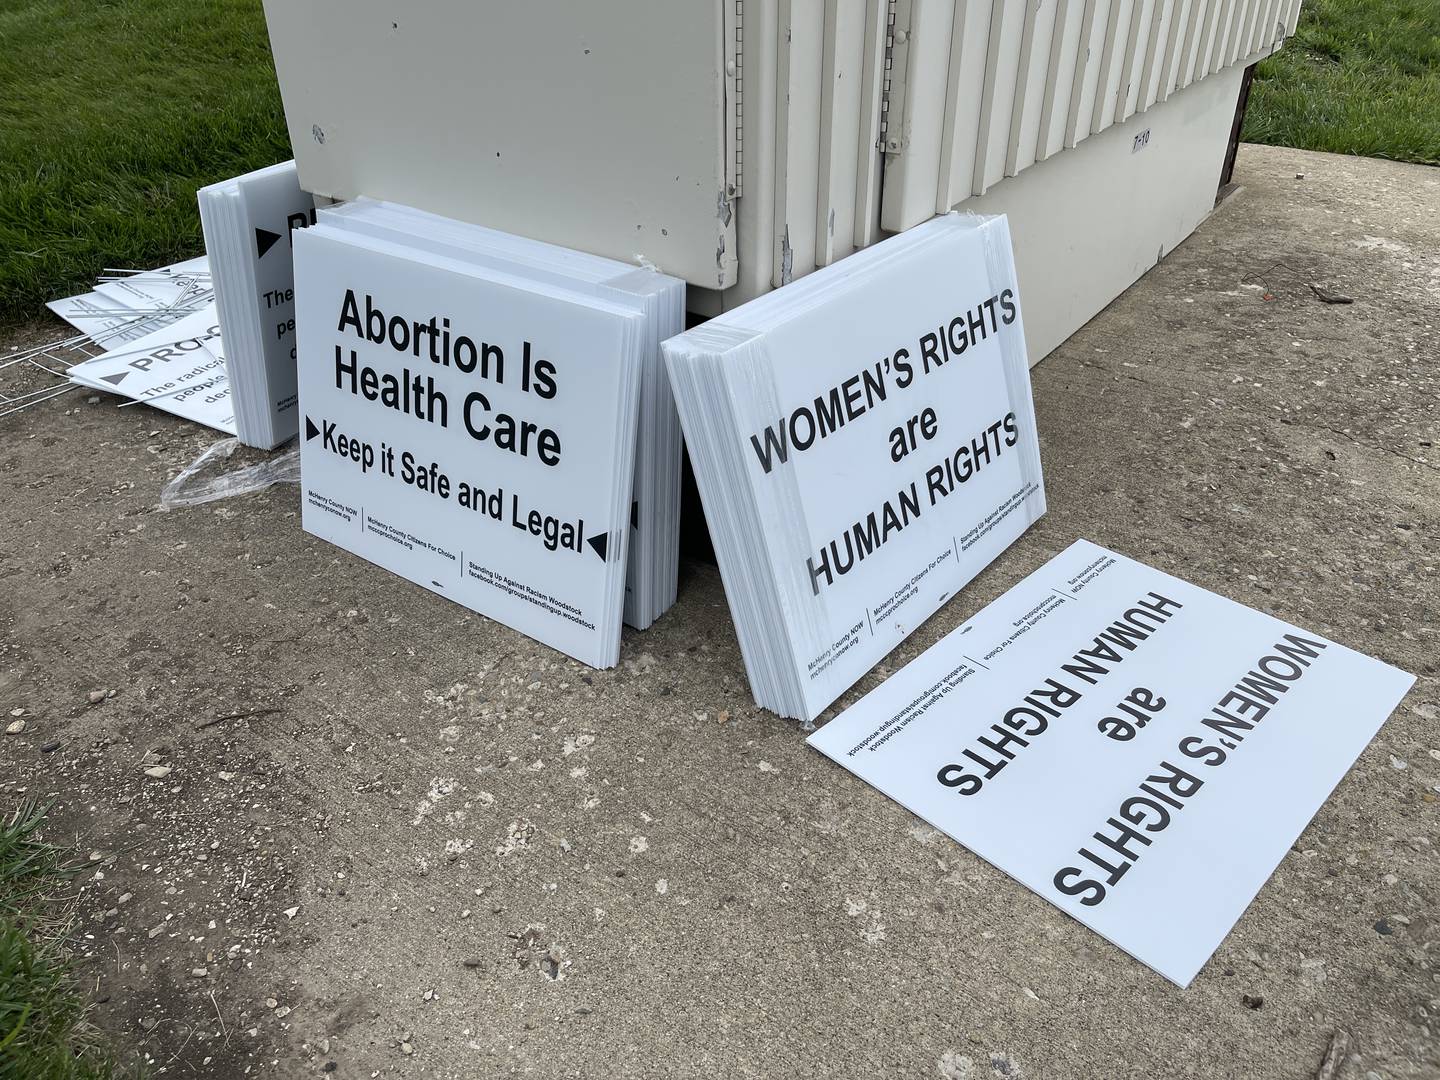 The organizations who held the rally provided signs to those in attendance. A pro-choice rally in Algonquin Saturday, Aug. 13, 2022, drew more than 50 people.